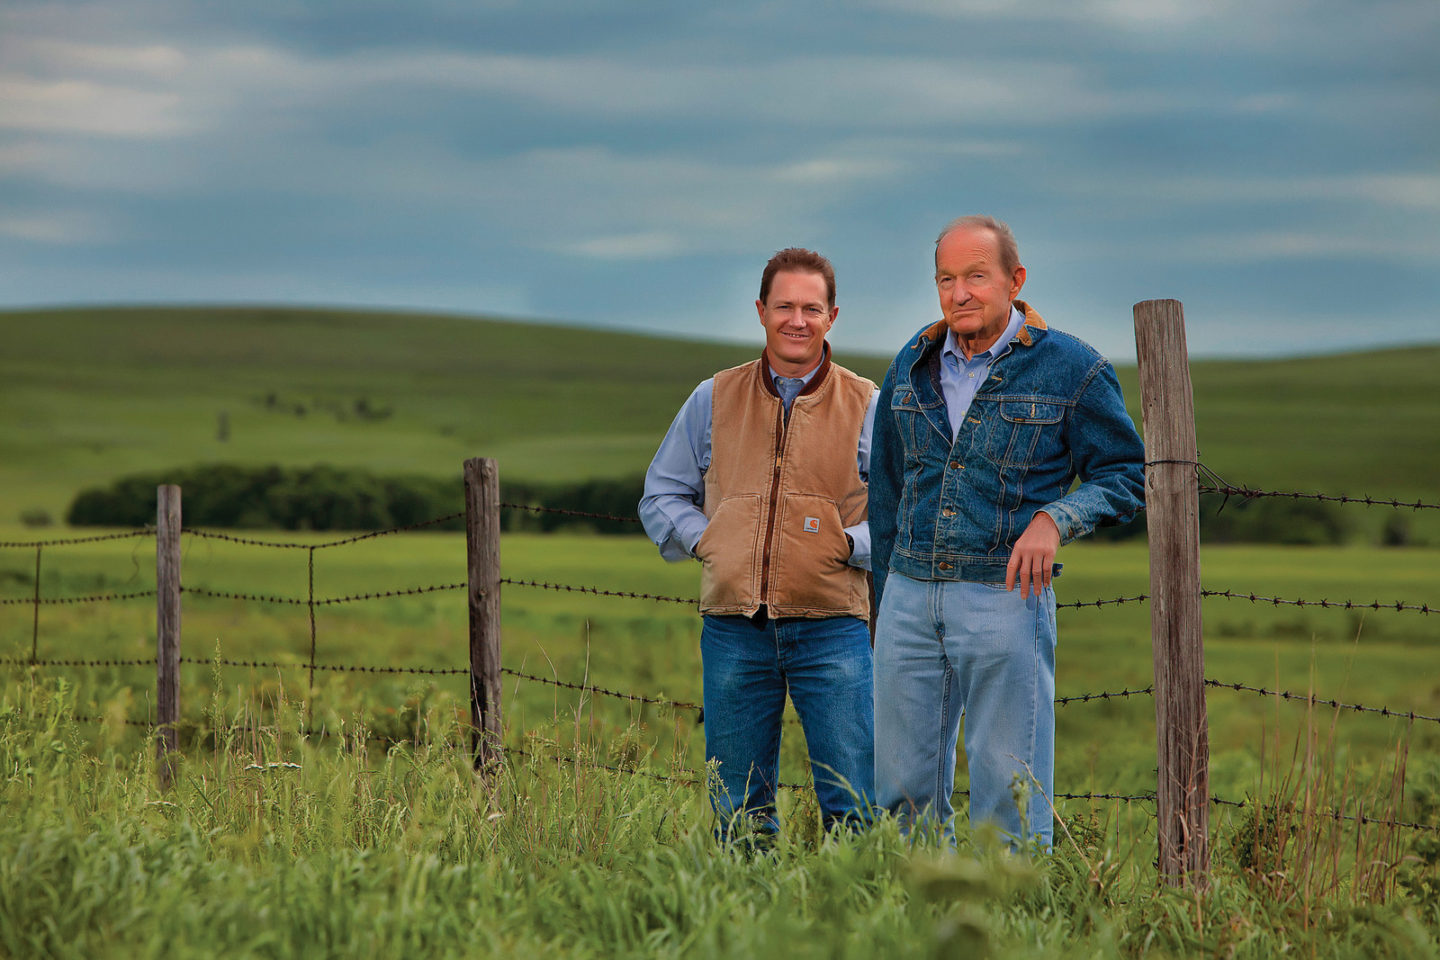 Two men standing in a field with a barbed wire fence behind them.